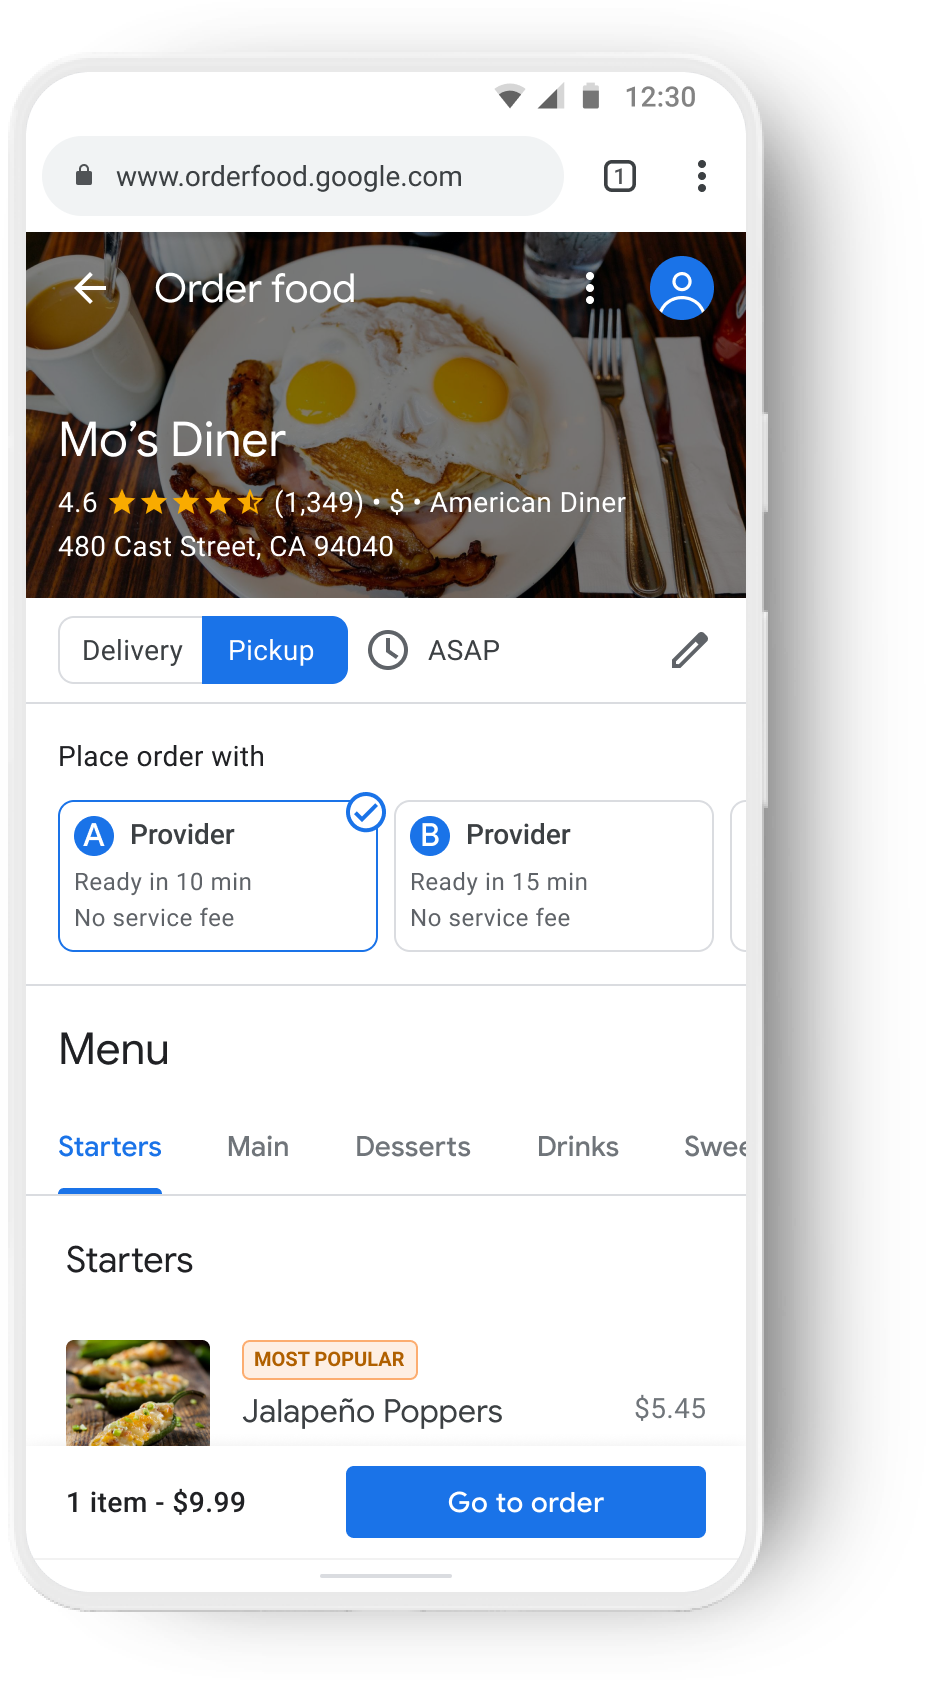 Mobile entry for a restaurant followed by two different delivery service providers.